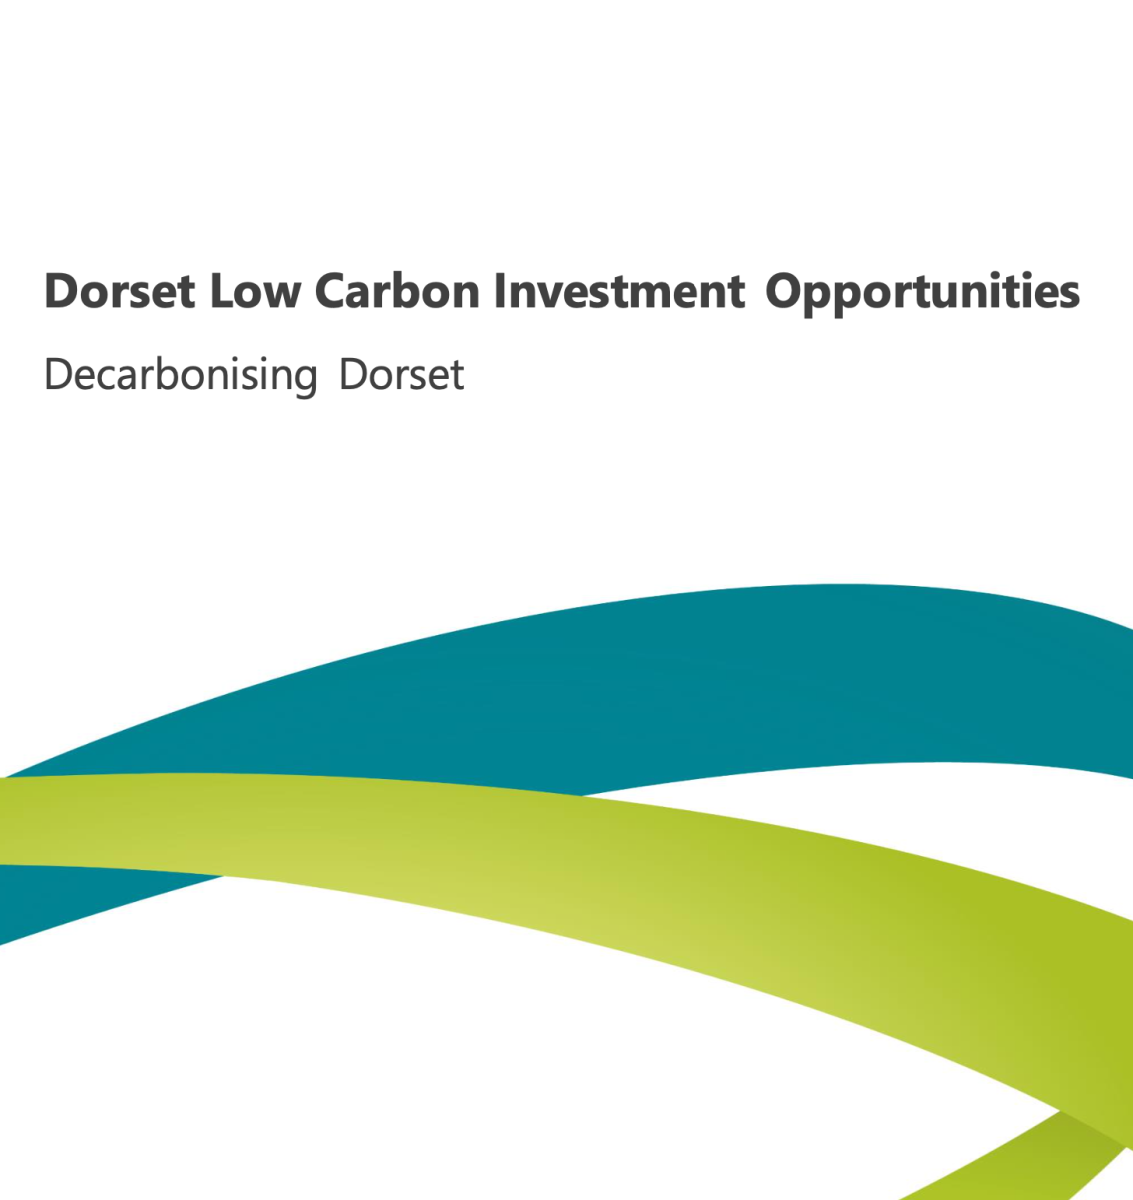 Dorset Low Carbon Investment Opportunities document